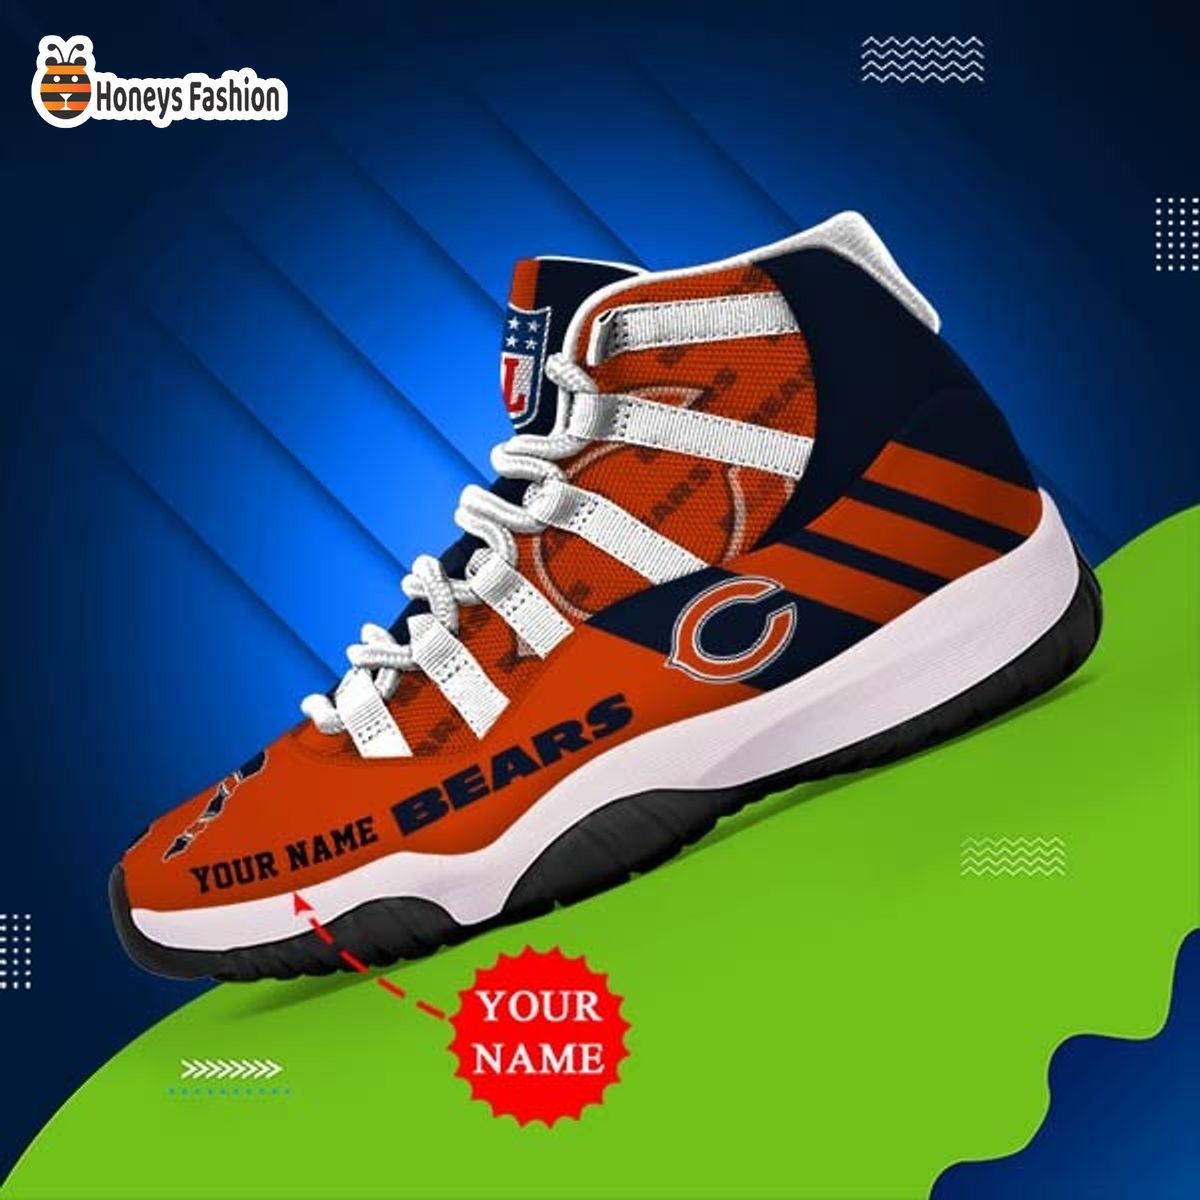 Chicago Bears NFL Adidas Personalized Air Jordan 11 Shoes